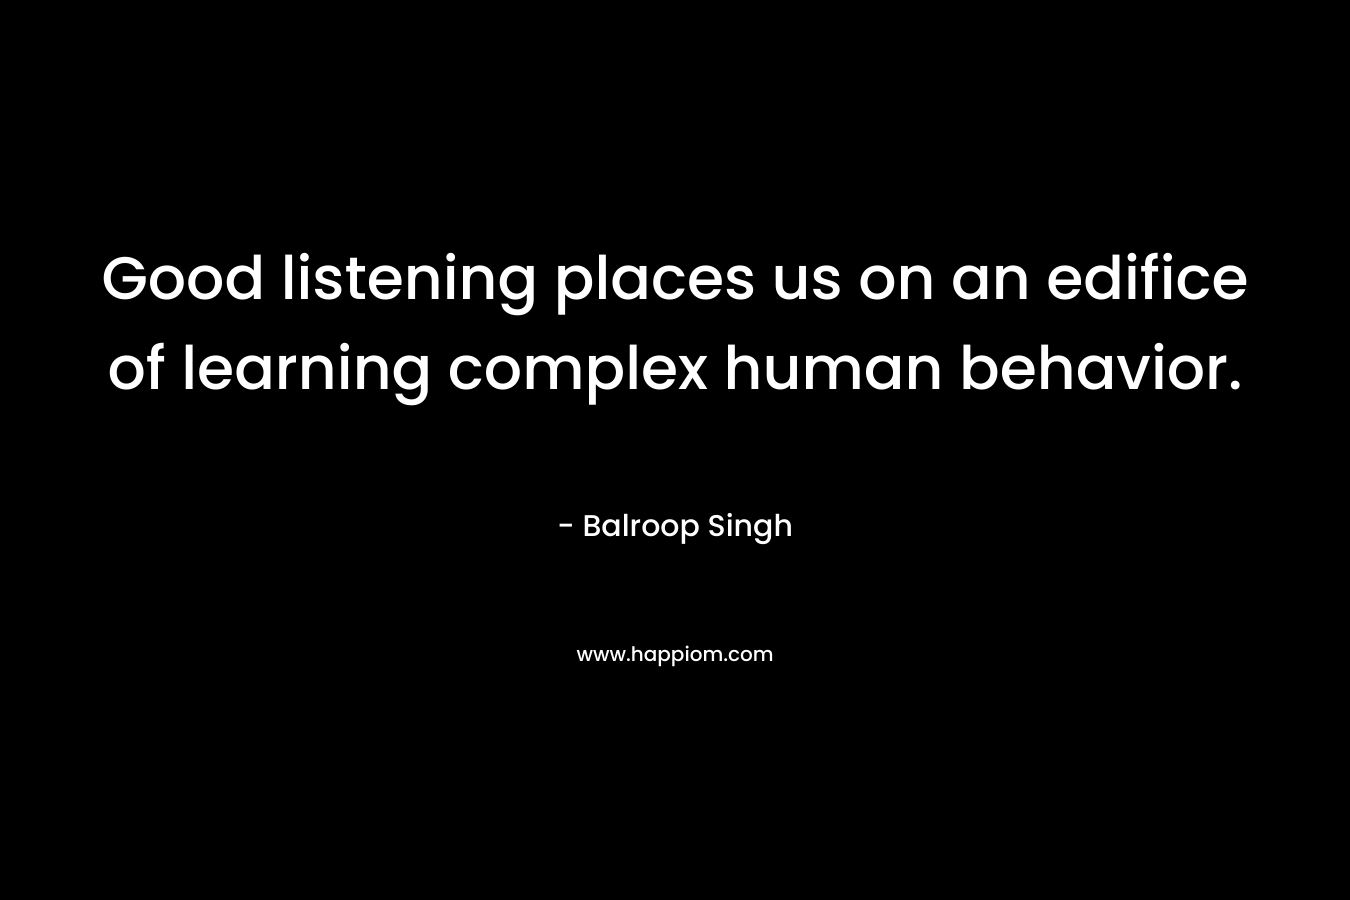 Good listening places us on an edifice of learning complex human behavior.